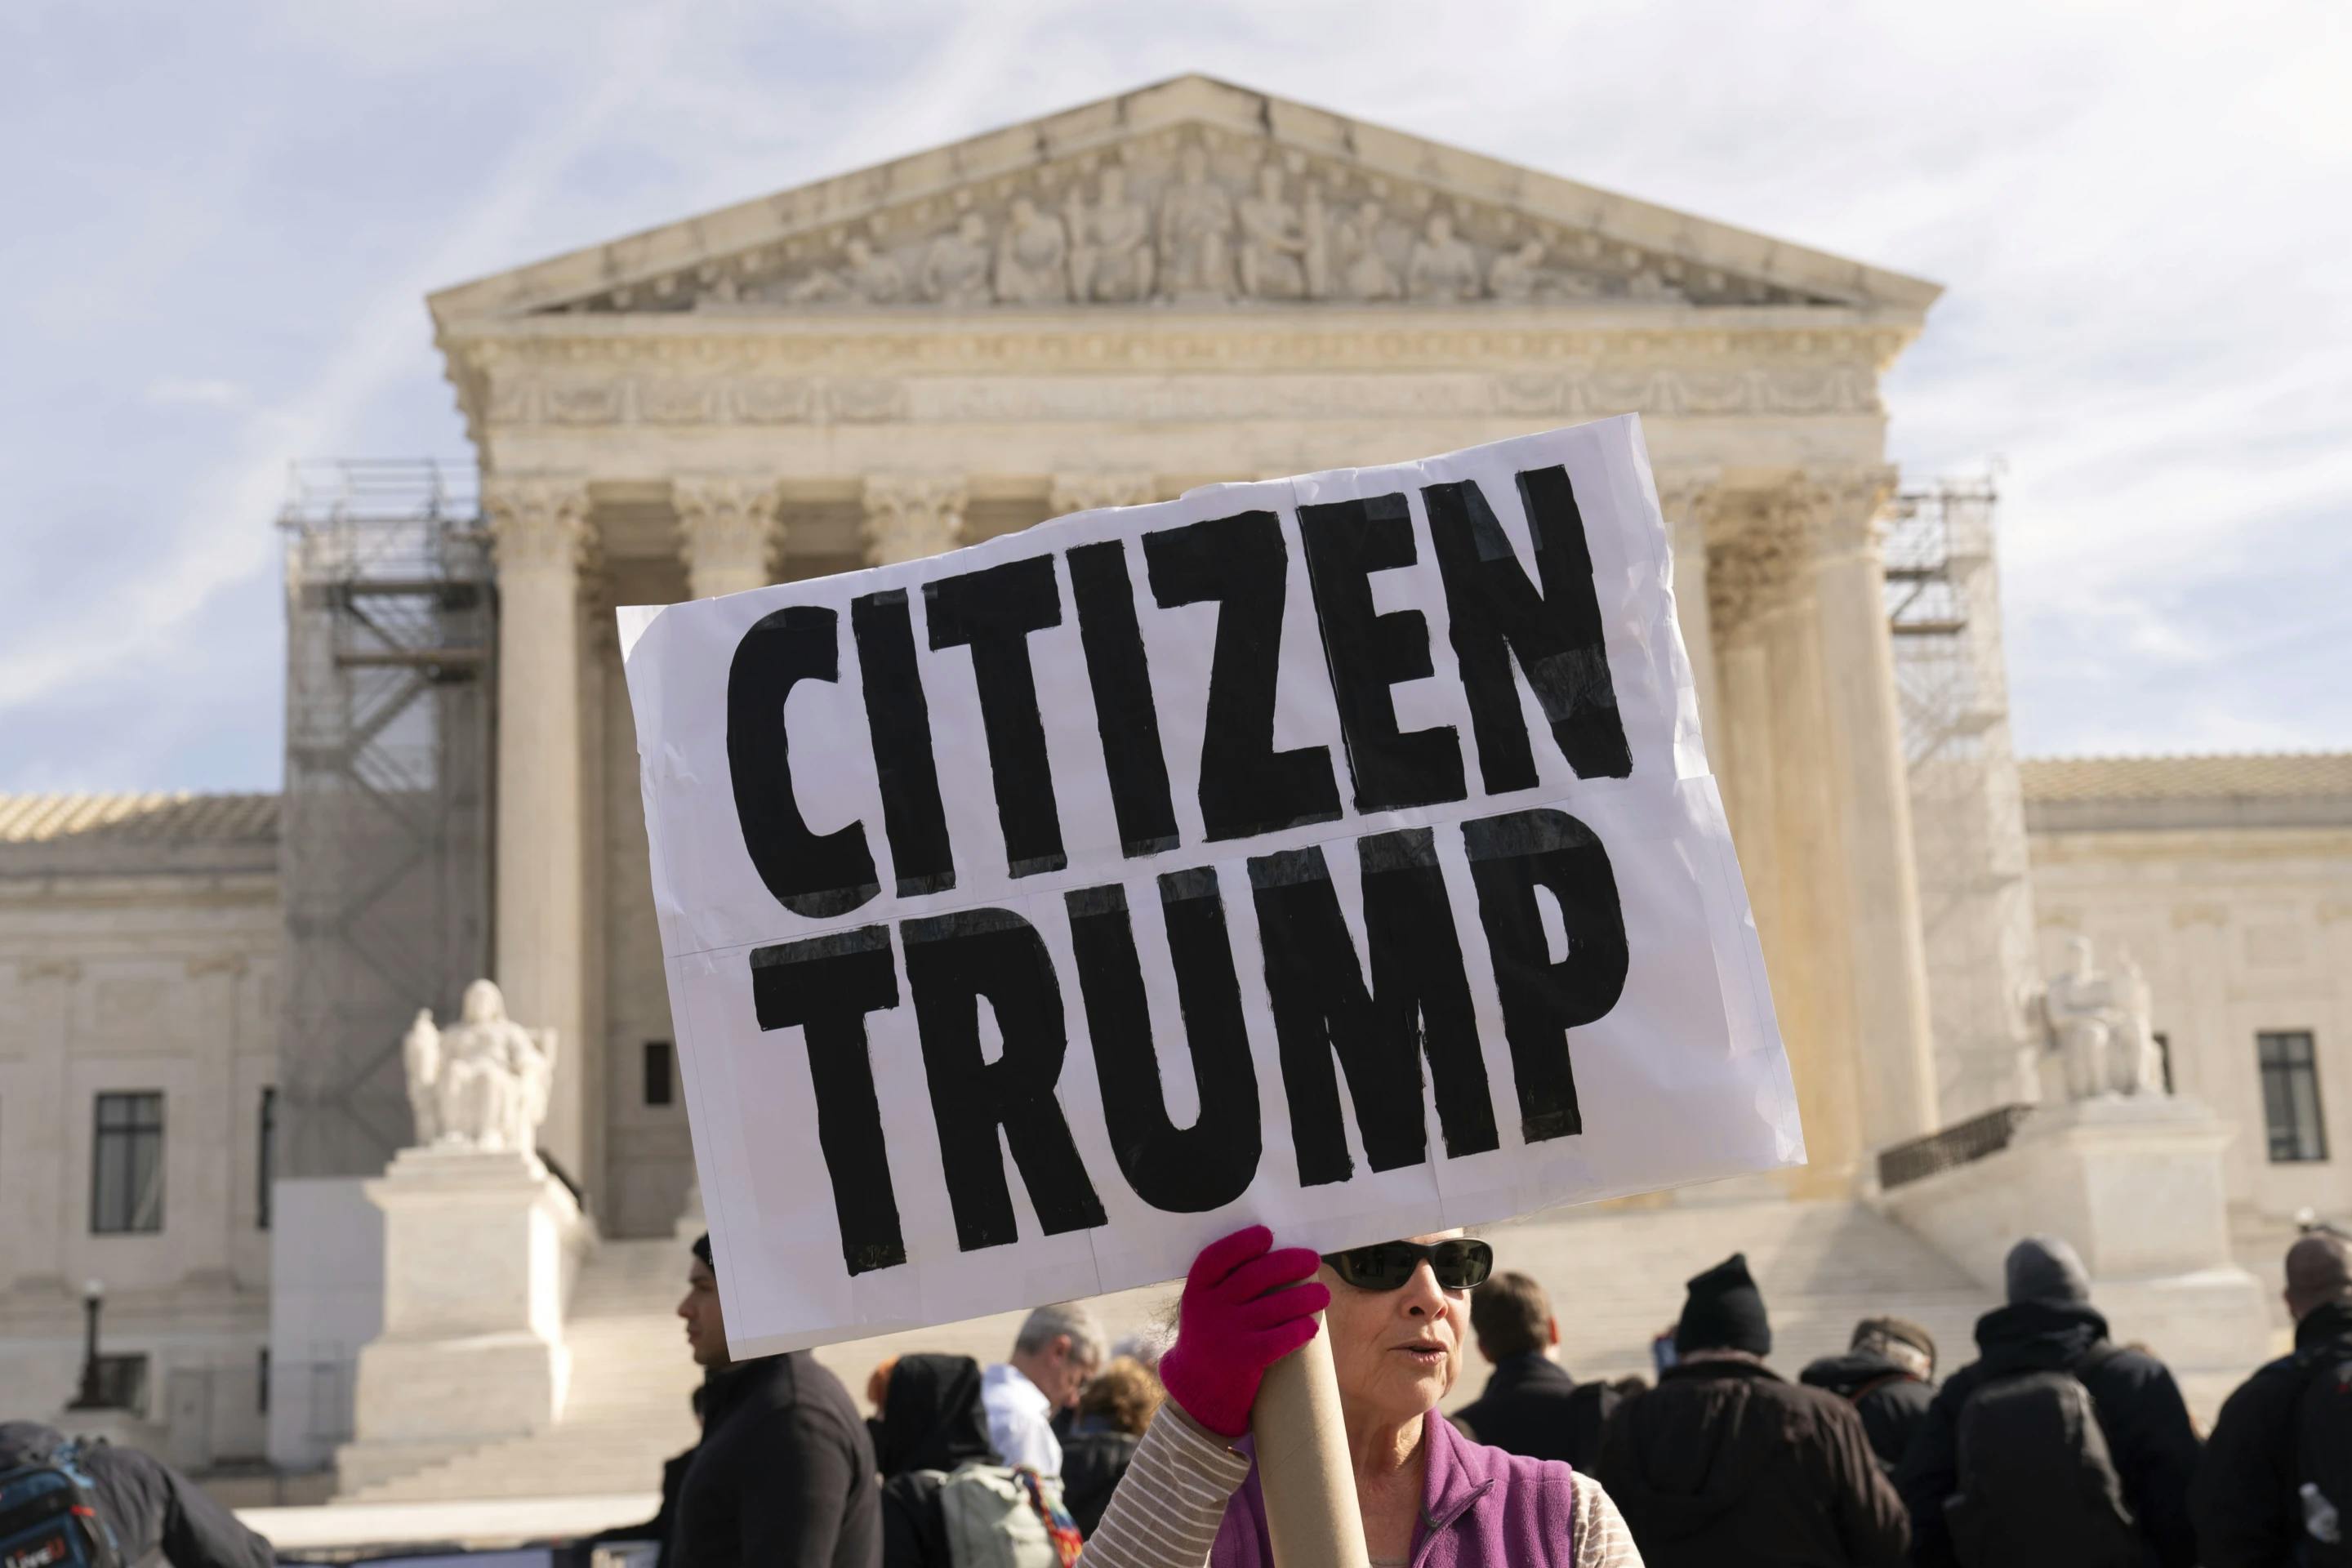 A protester outside of the Supreme Court